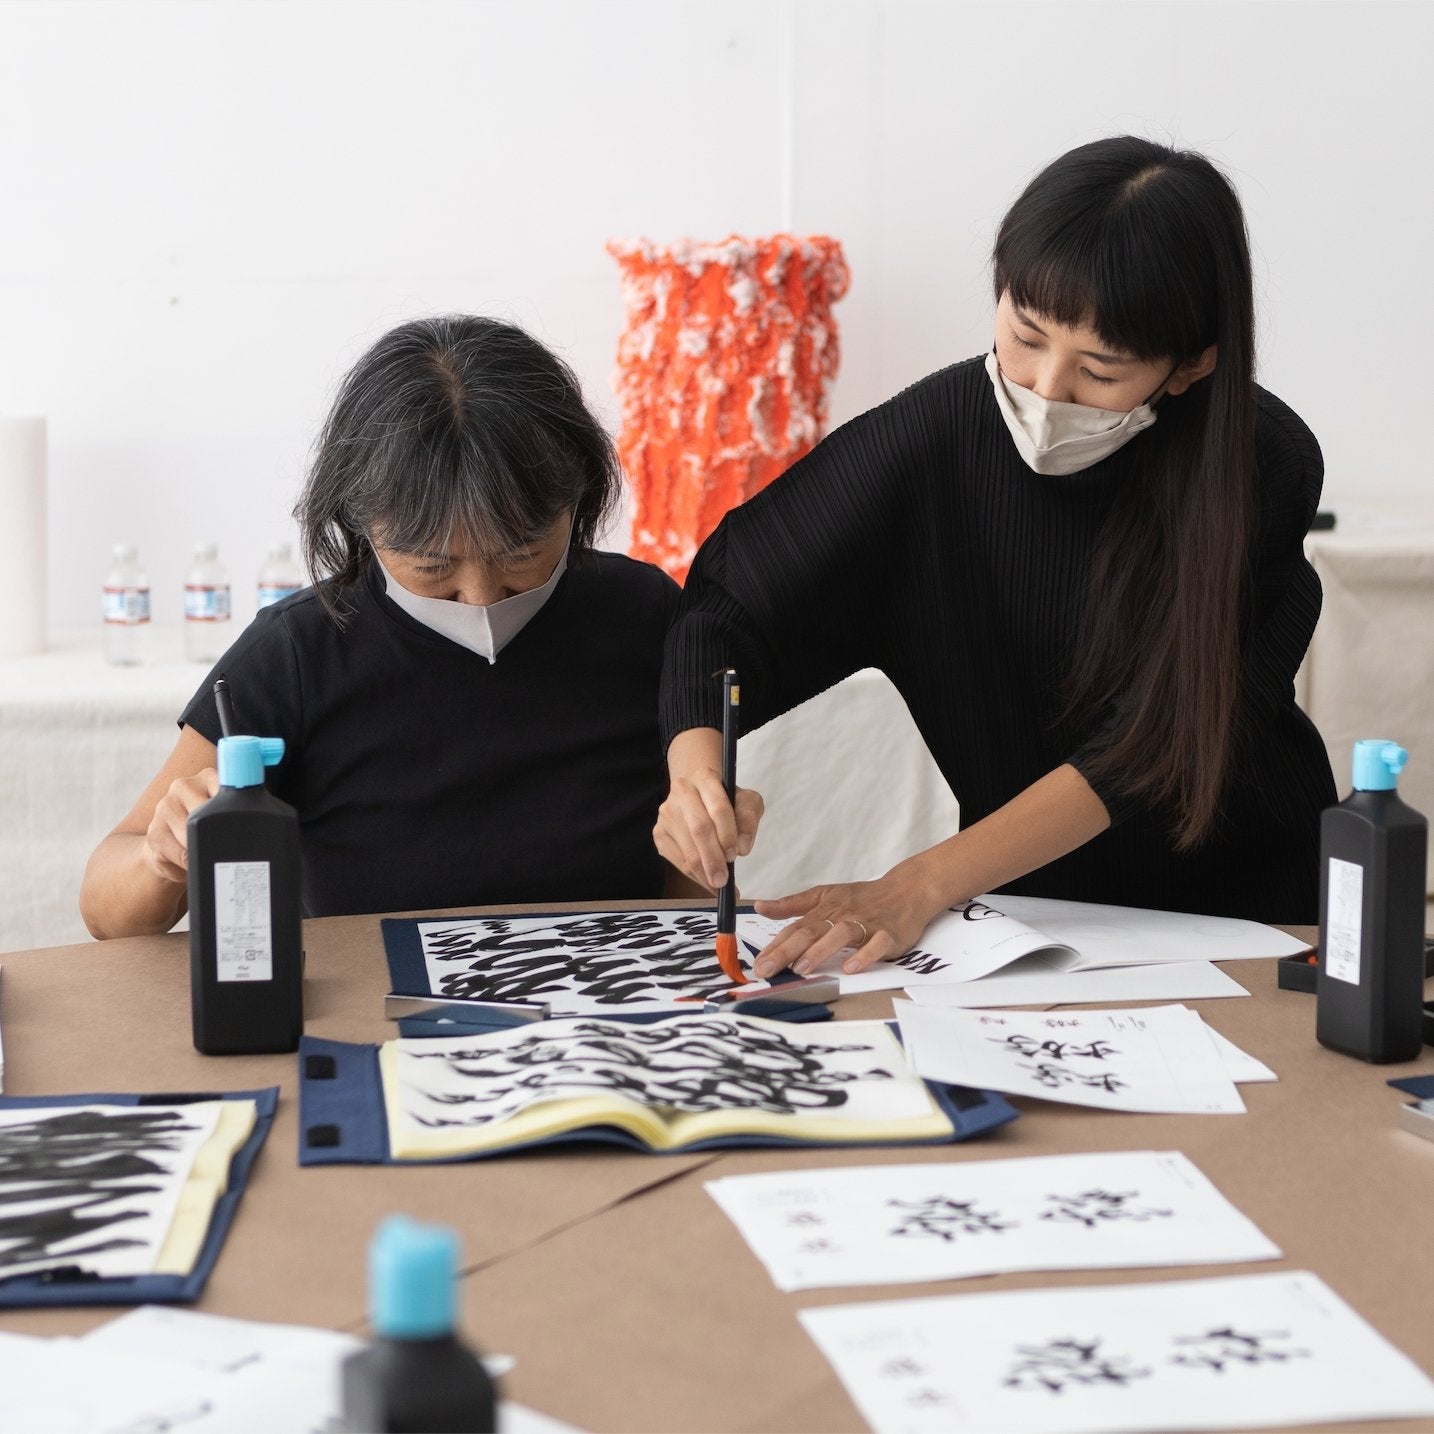 SEASONS 04 Workshops with Aoi Yamaguchi - April 29th &amp; April 30th, 2023 | Tortoise General Store